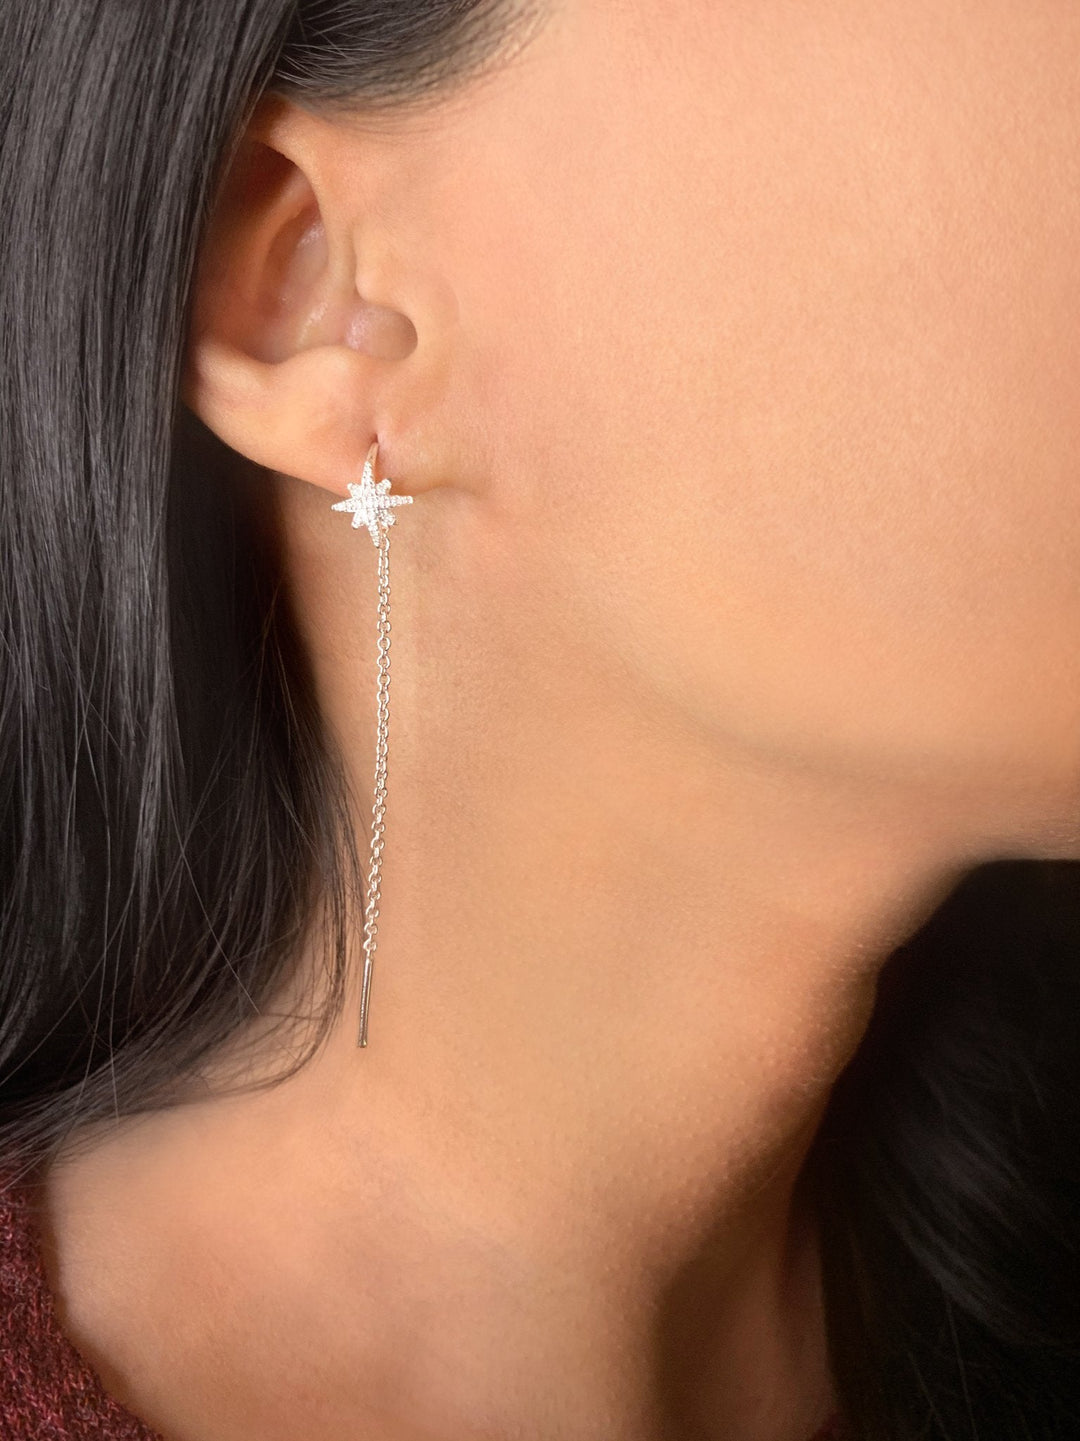 North Star Tack-In Diamond Earrings in Sterling Silver